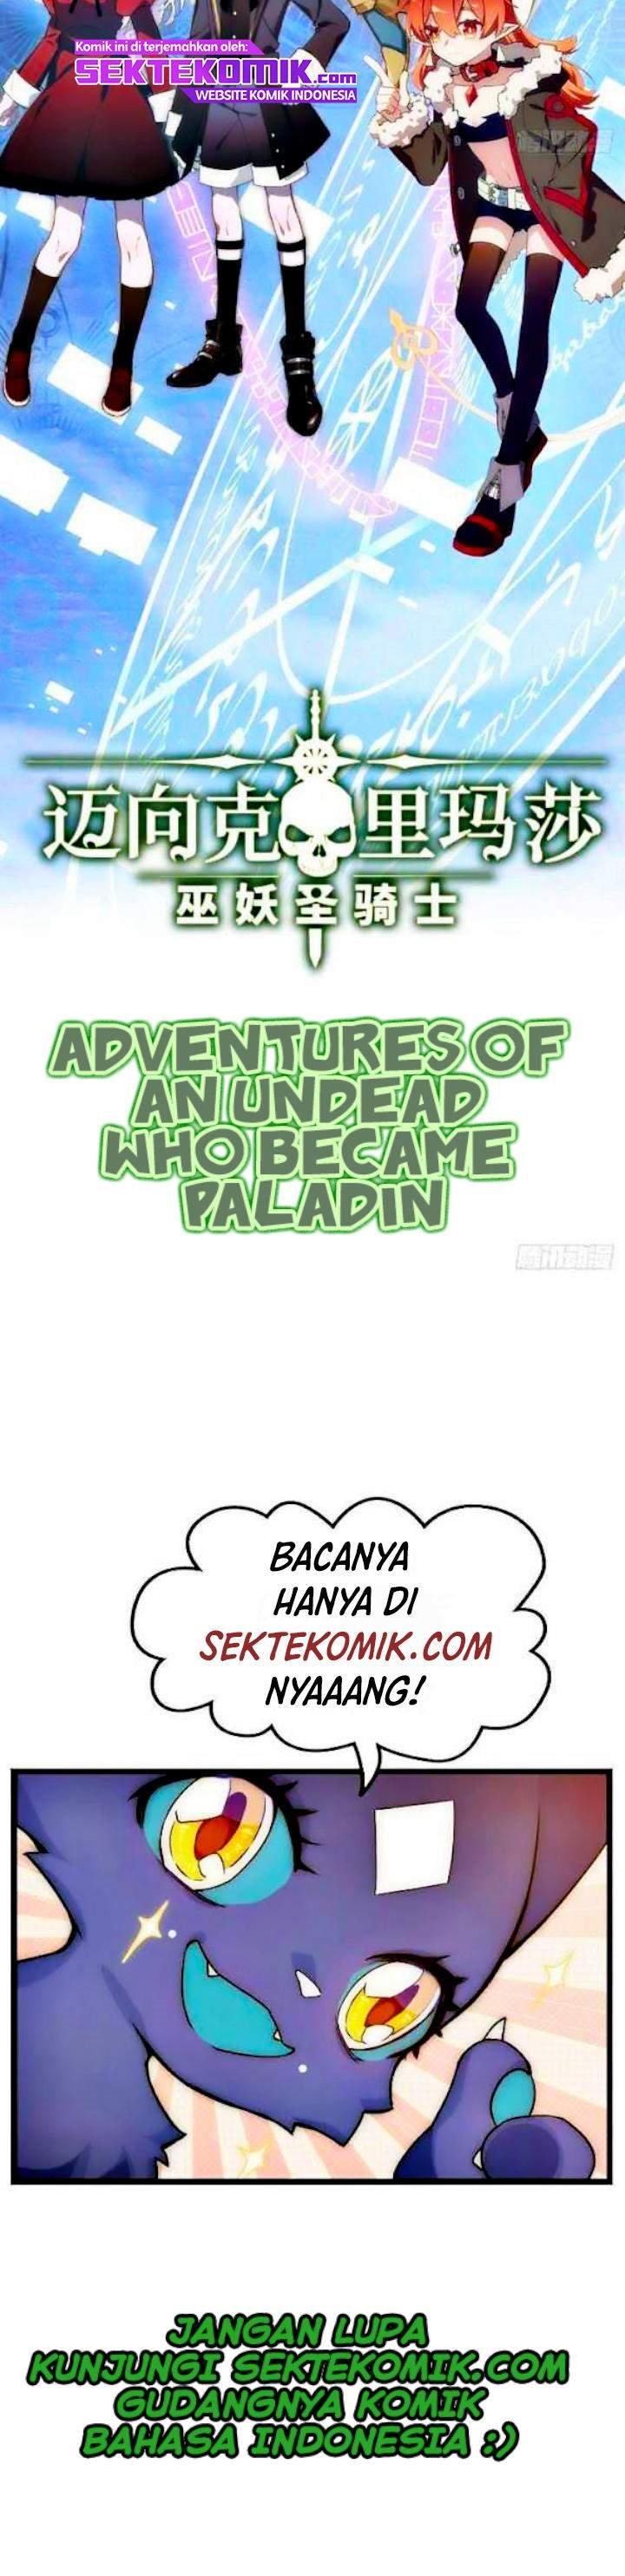 Baca Adventures of an Undead Who Became Paladin Chapter 0  - GudangKomik